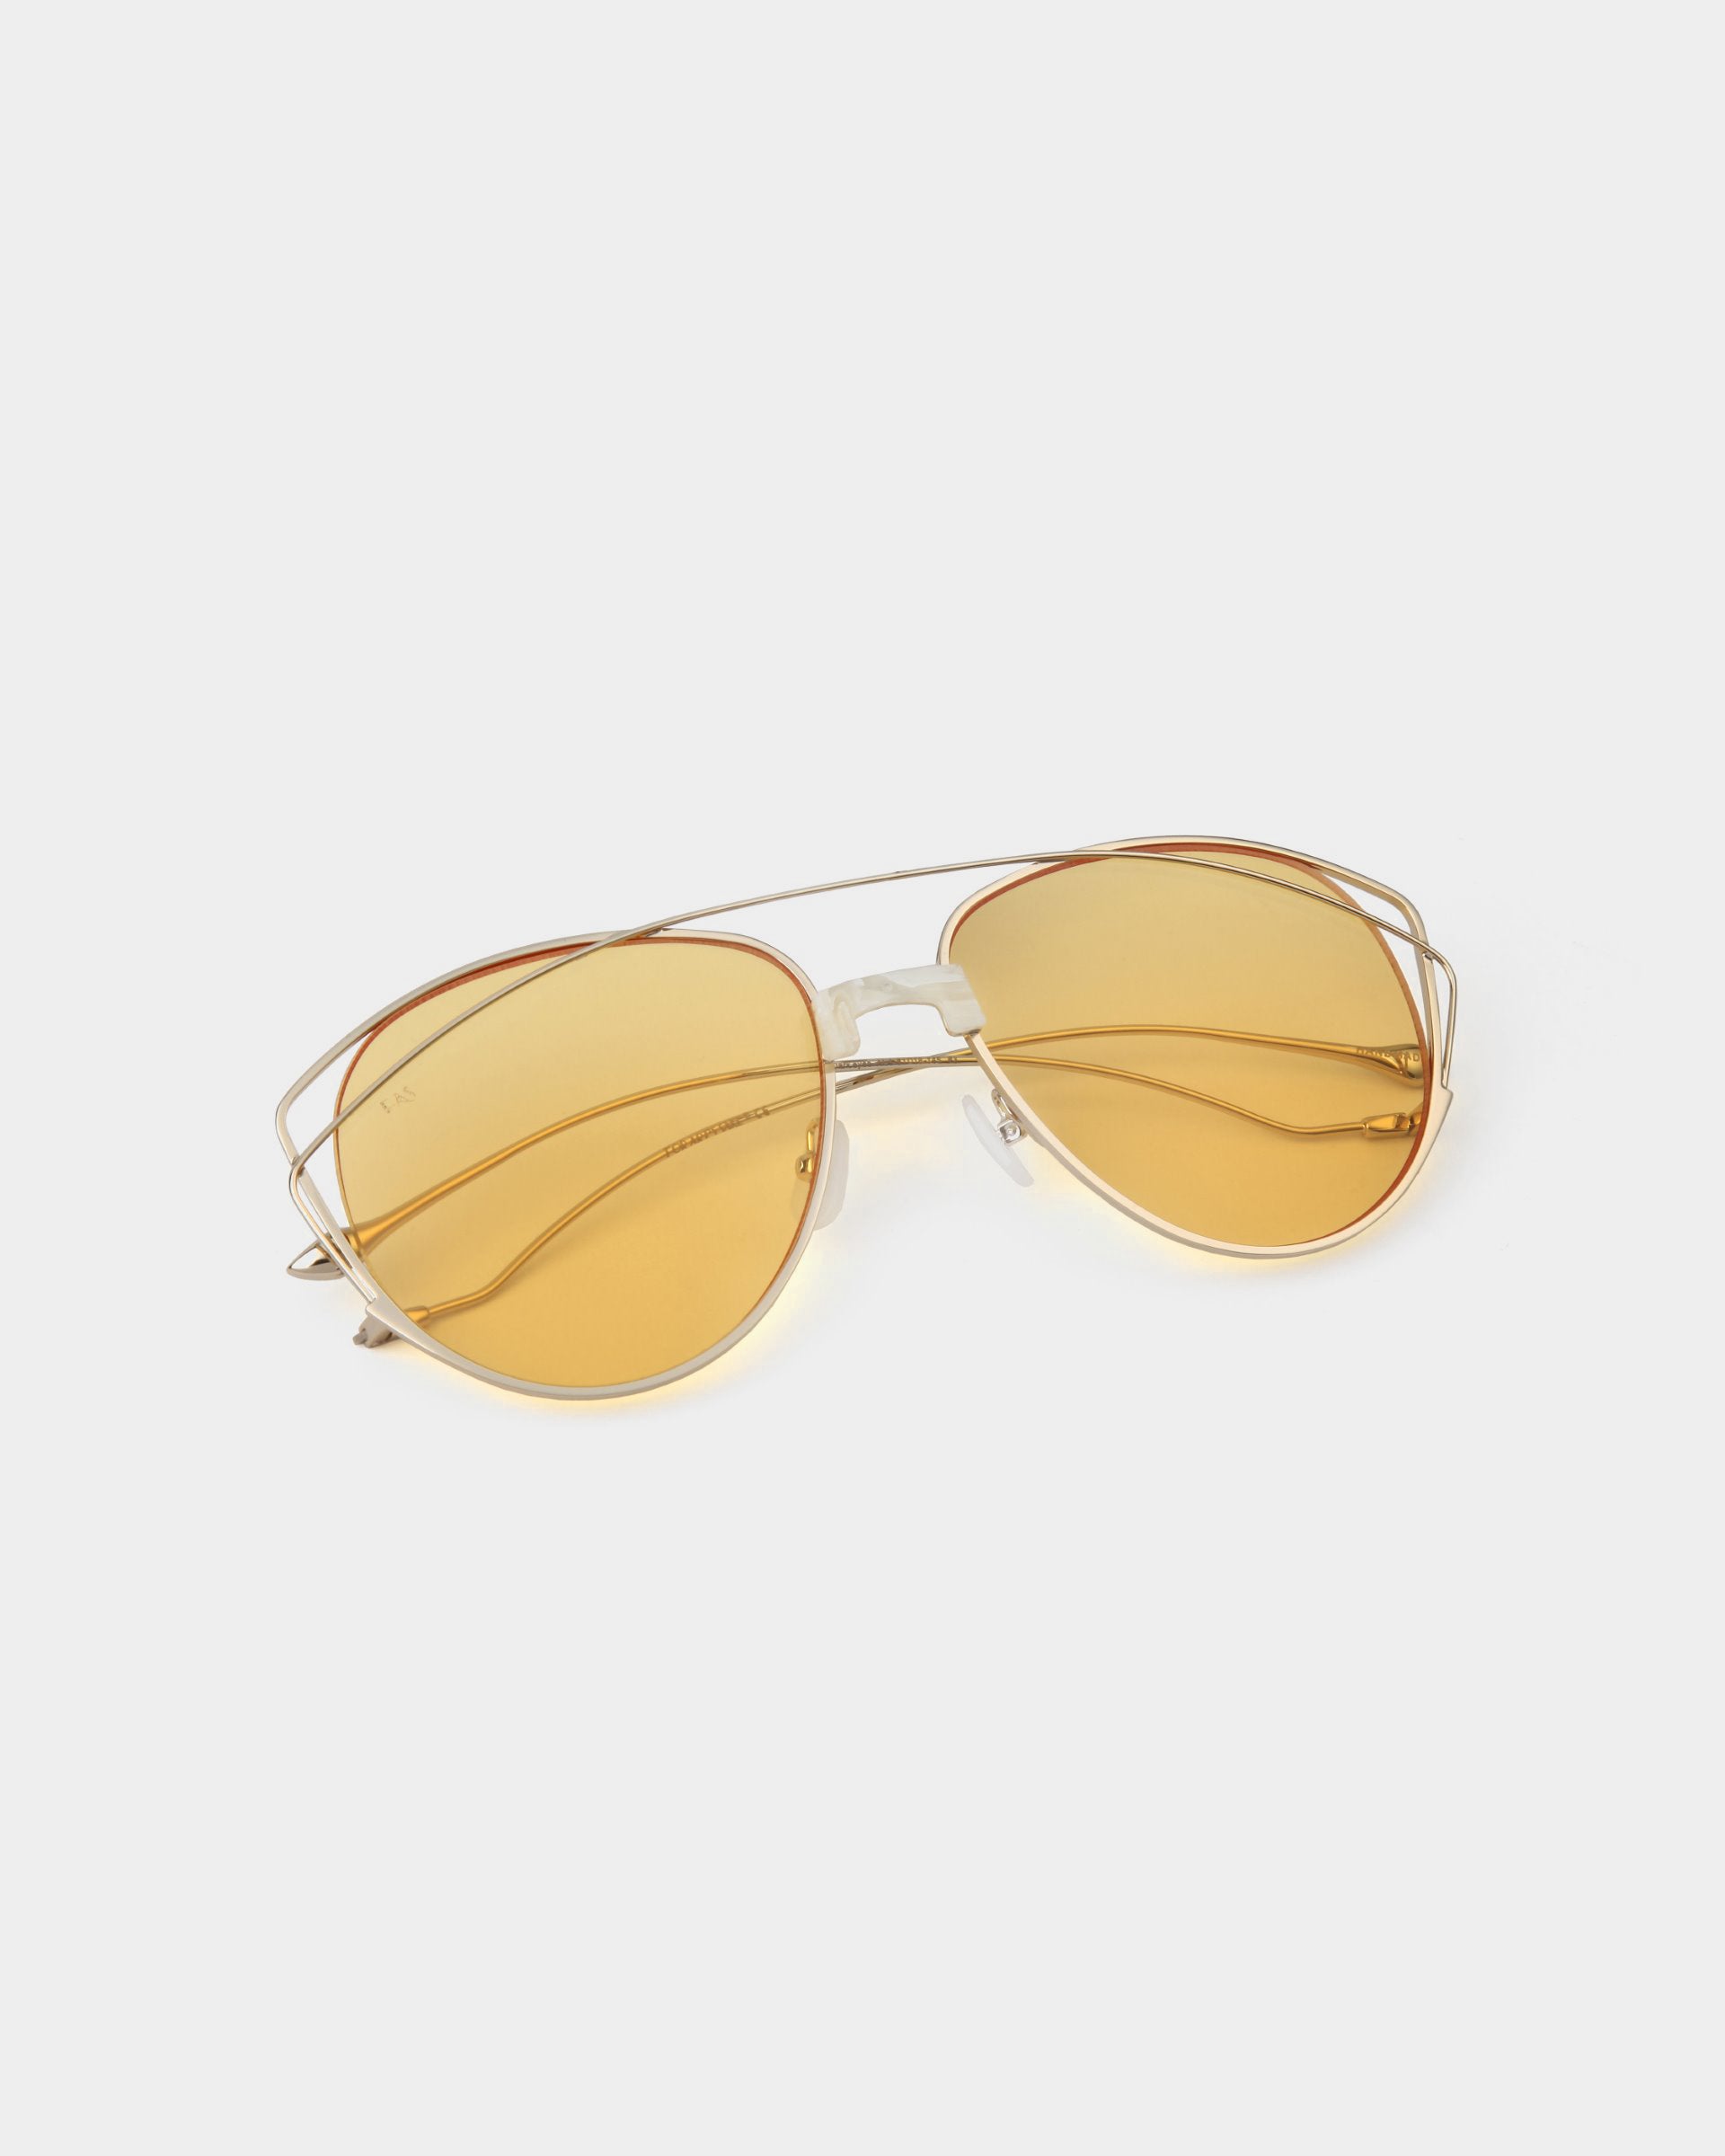 A pair of aviator-style Dark Eyes sunglasses with golden-tinted, nylon lenses and thin, stainless steel gold frames placed on a white background. The glasses offer 100% UV protection and have a double bridge design, adding a stylish flair to their classic look by For Art's Sake®.